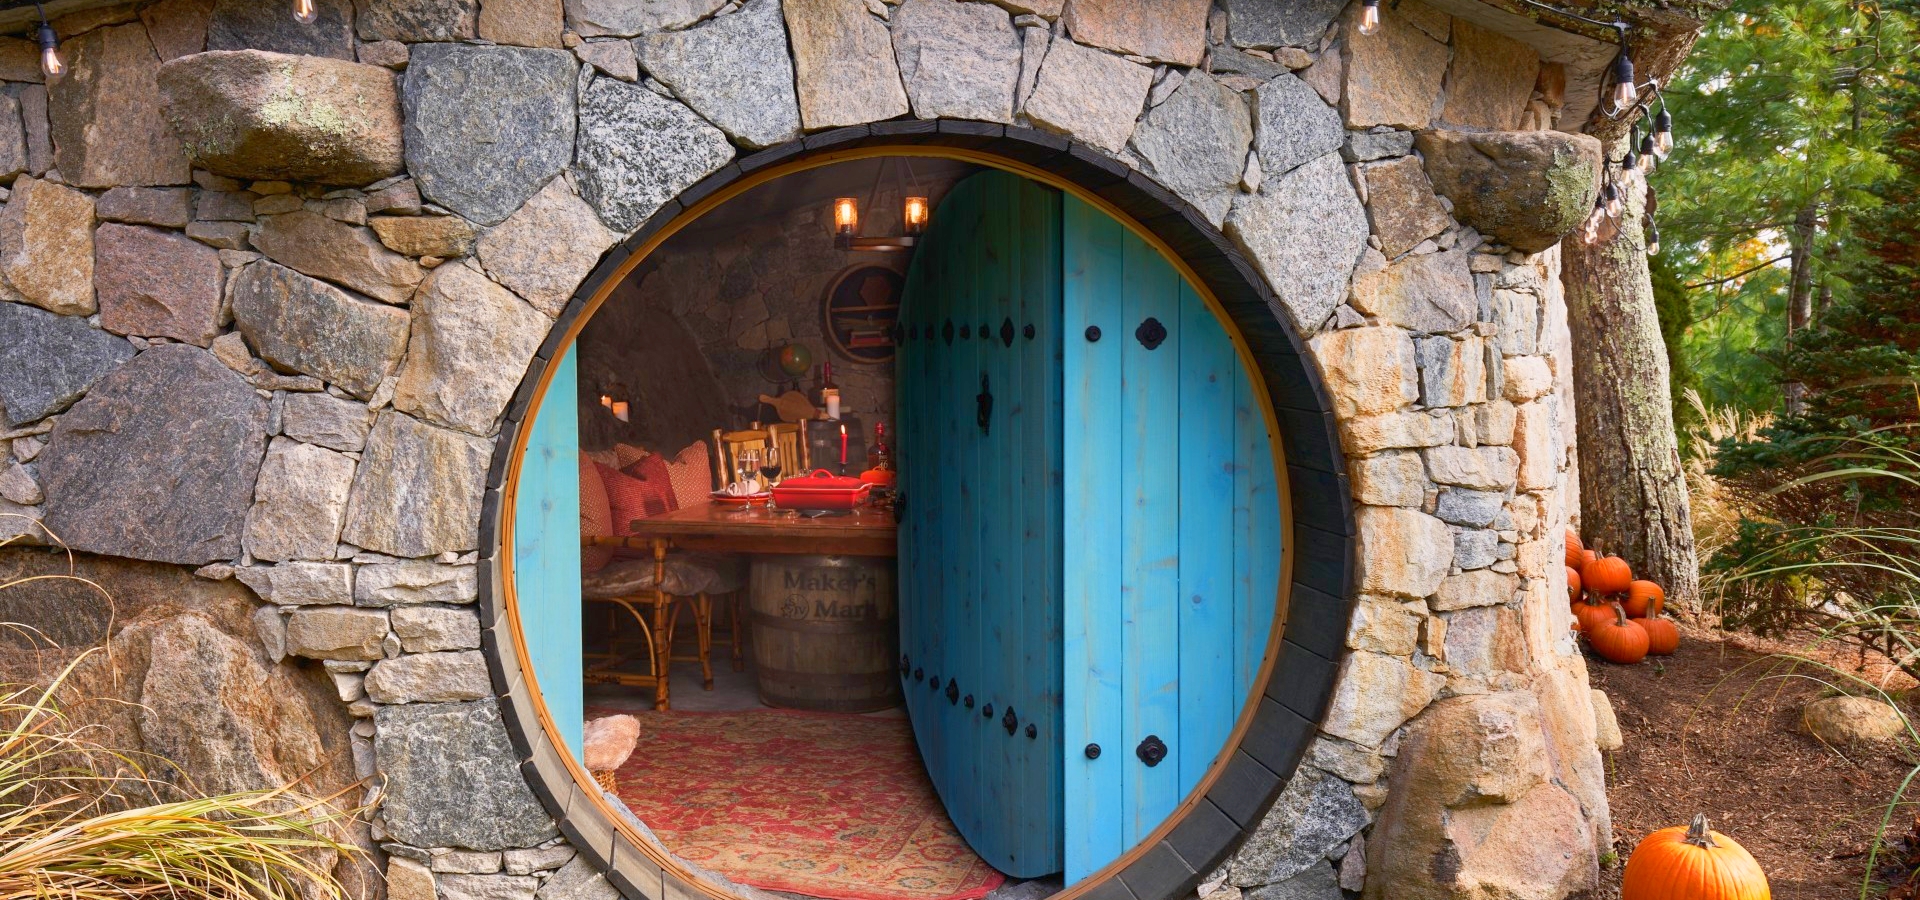 Hobbit House dining experience at The Preserve Resort.